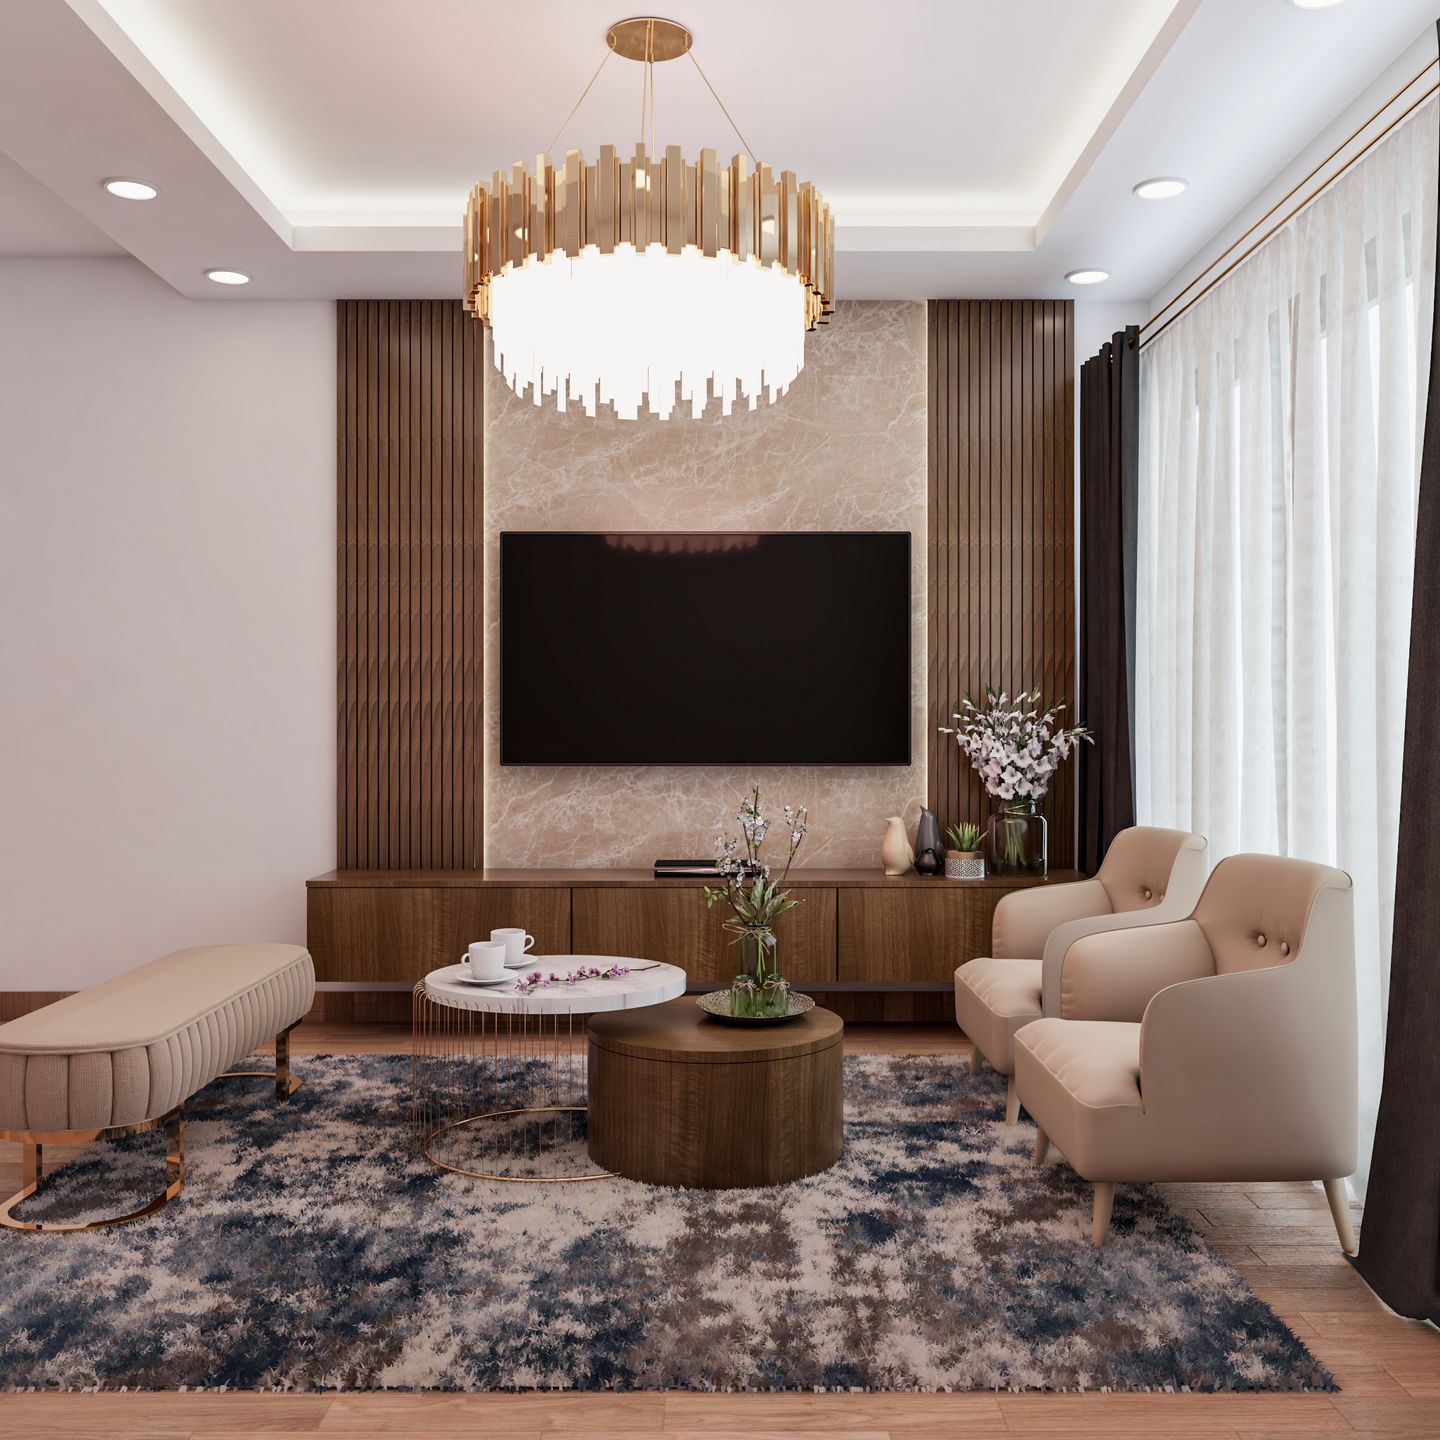 Modern Living Room With Chandelier - Livspace